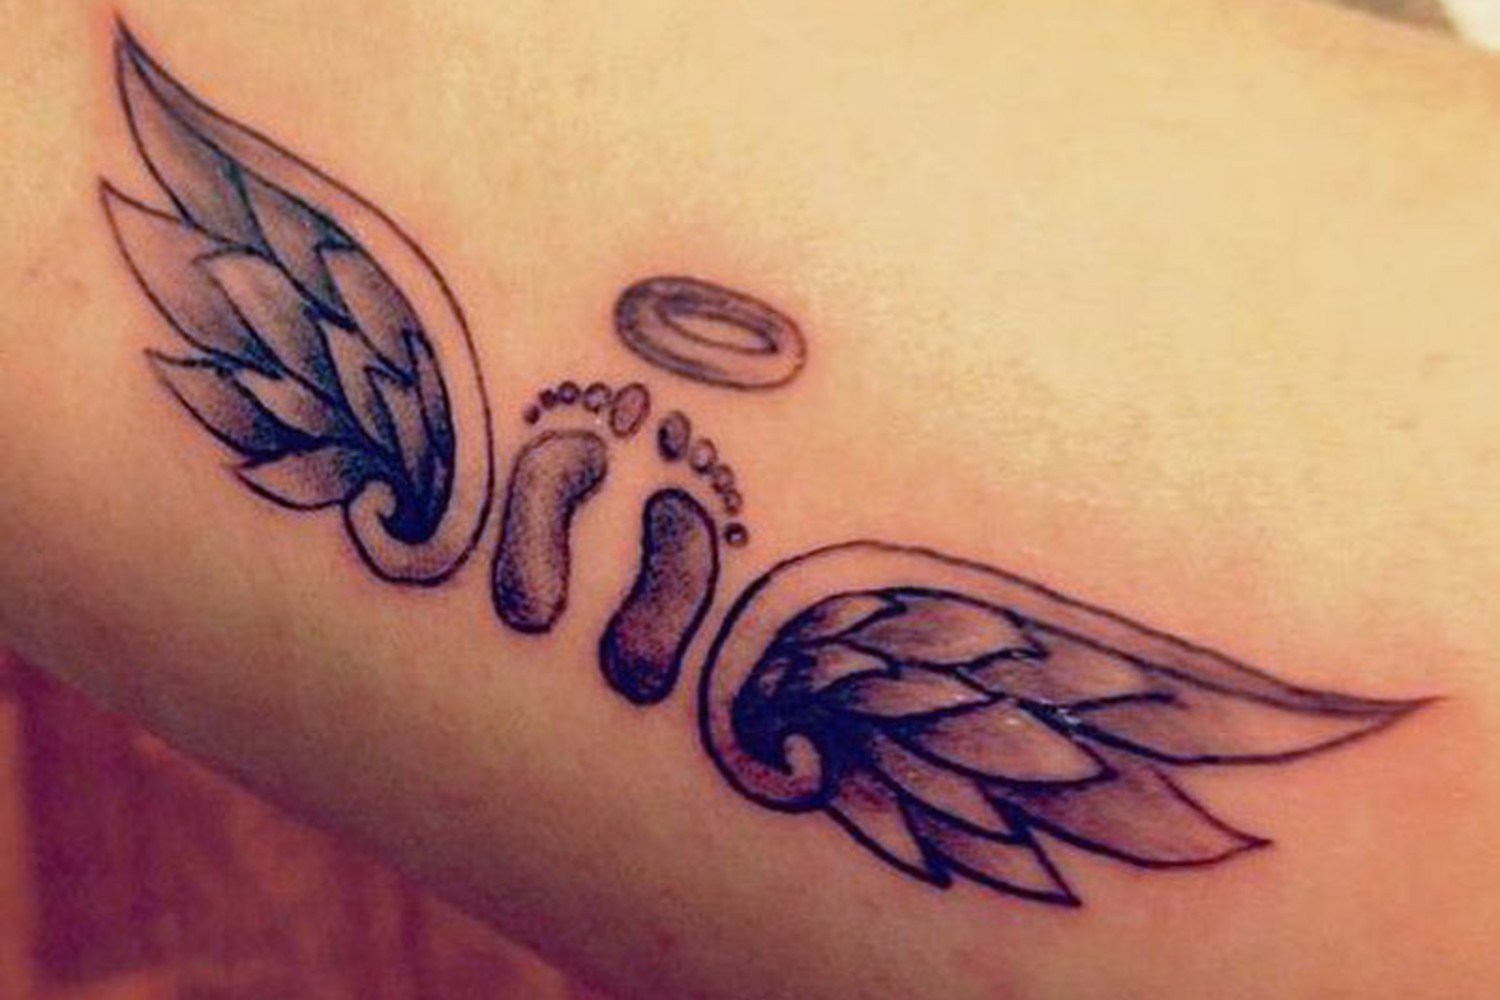 65 Tiny and Stunning Tattoo Ideas for GrownUps